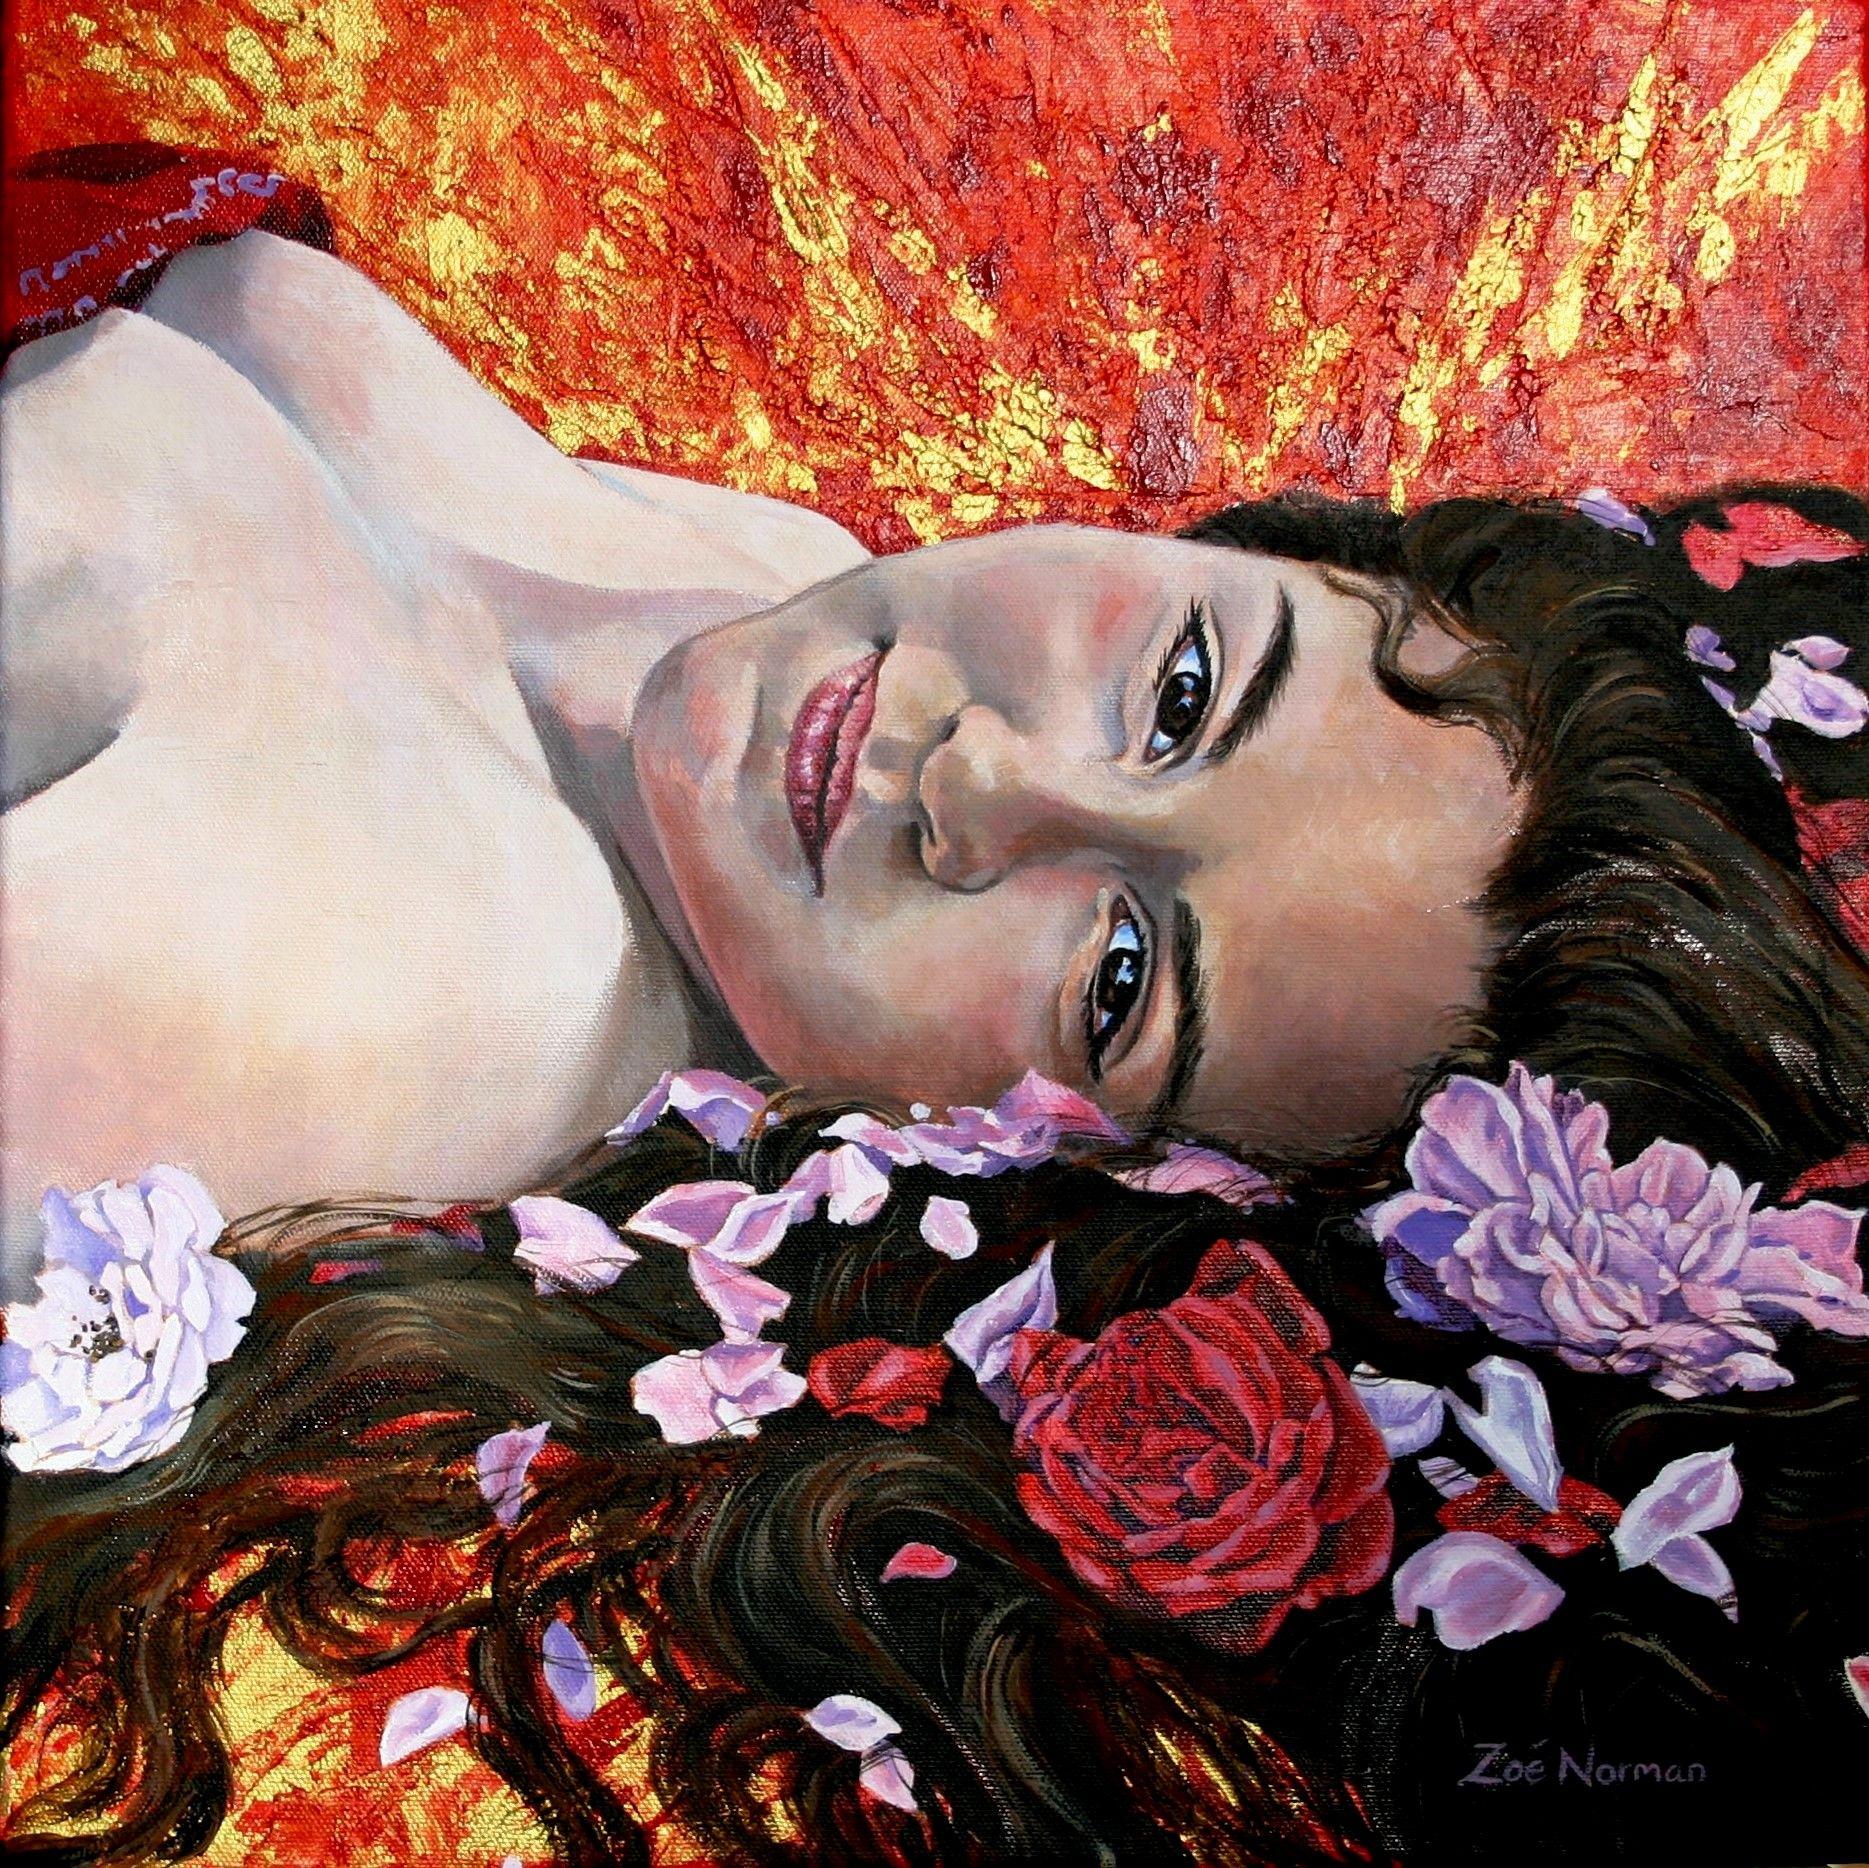 Acrylic and gold painting on stretched cotton canvas.    Reclining young woman laying among rose petals. I was inspired by the Pre-Raphaelite paintings and chose a contemplative but intimate pose to capture the youth and beauty of my model.    This